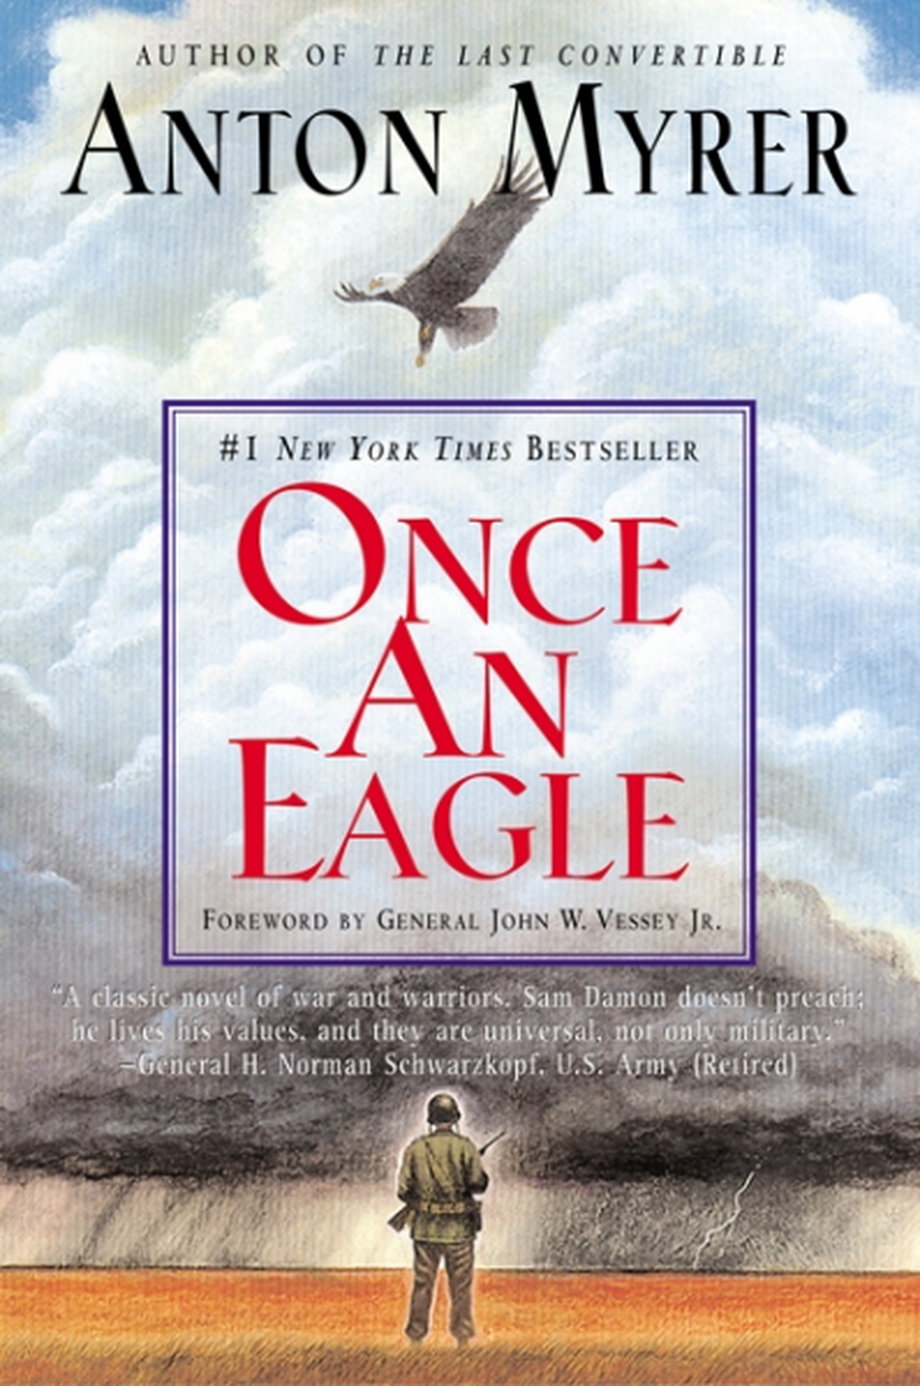 'Once an Eagle' by Anton Myrer